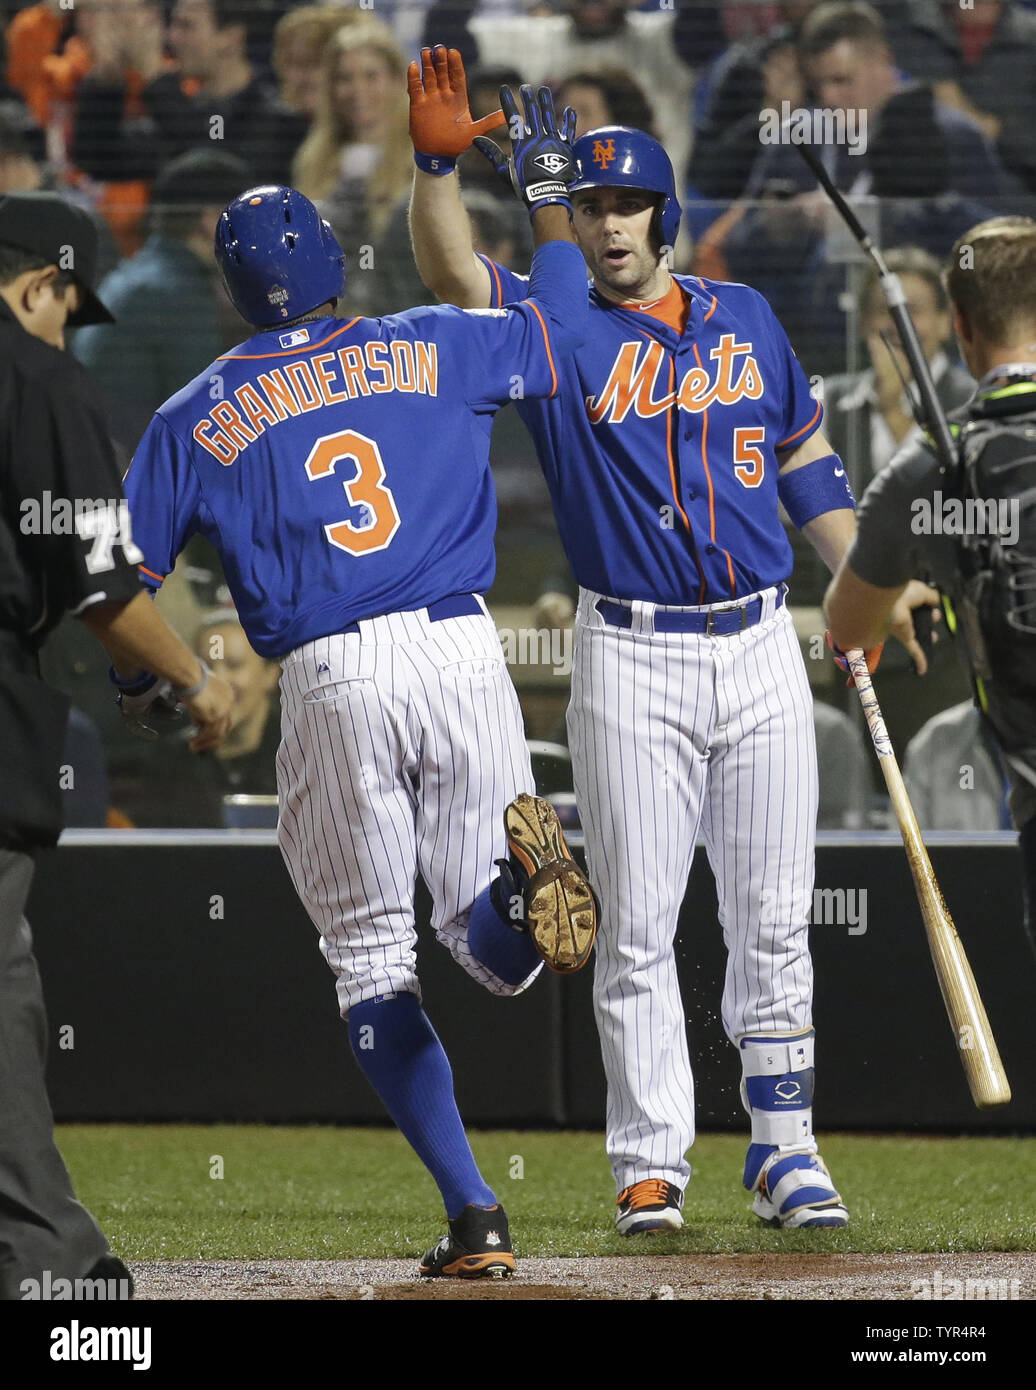 Wright, Granderson homer as Mets beat Royals in Game 3